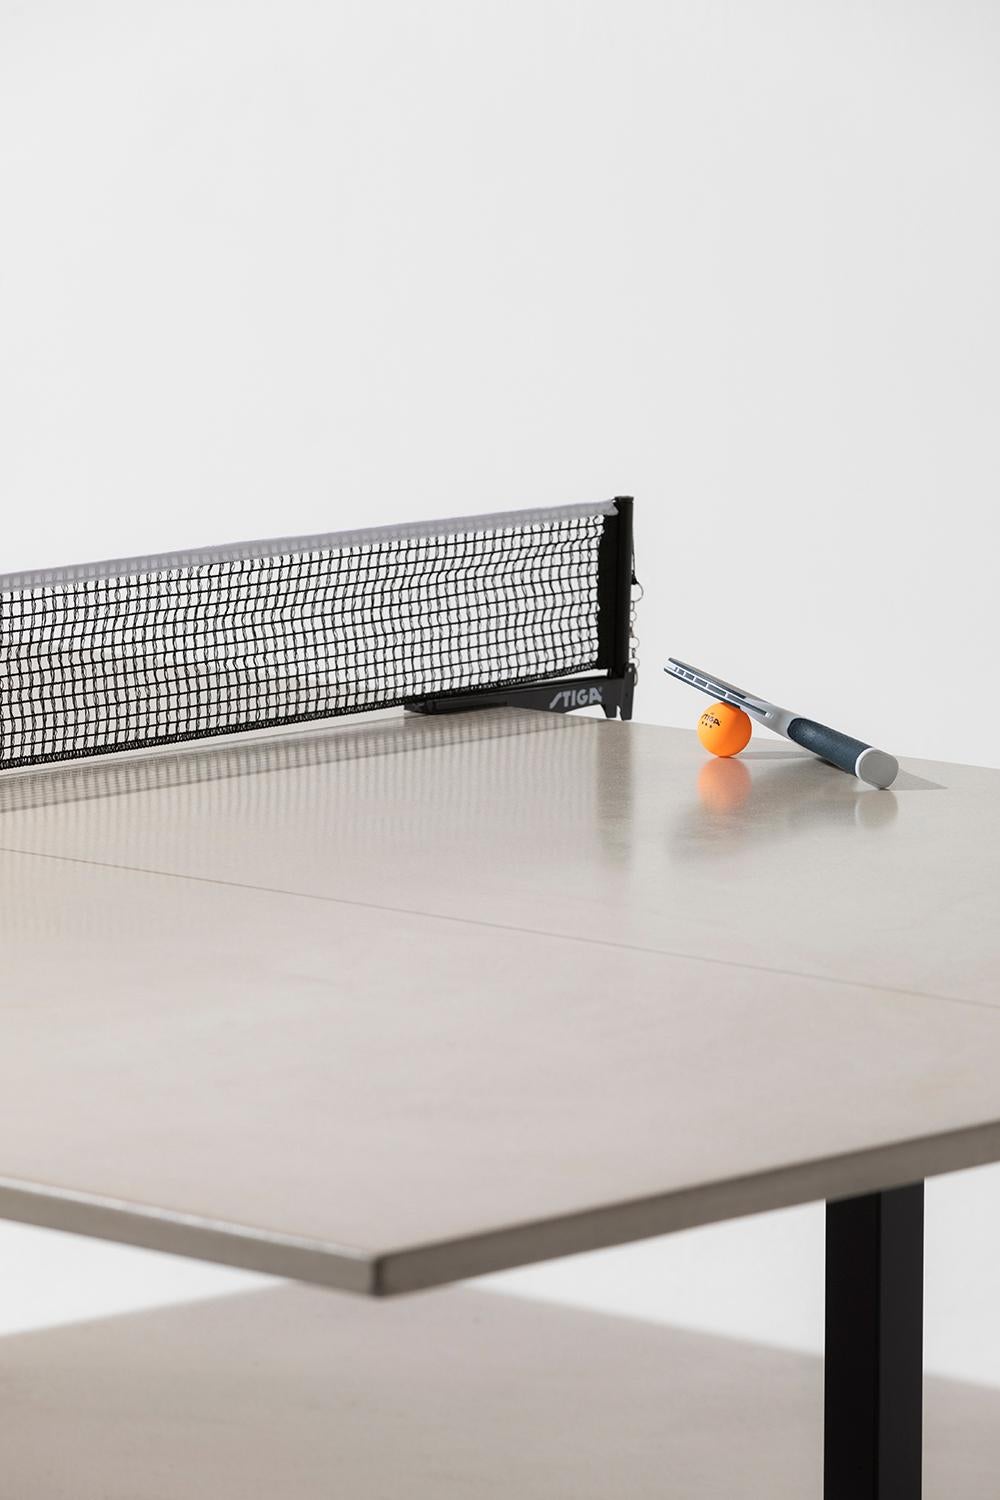 American James de Wulf Vue Concrete Ping Pong Table, Powder Coated Steel Base - Standard For Sale